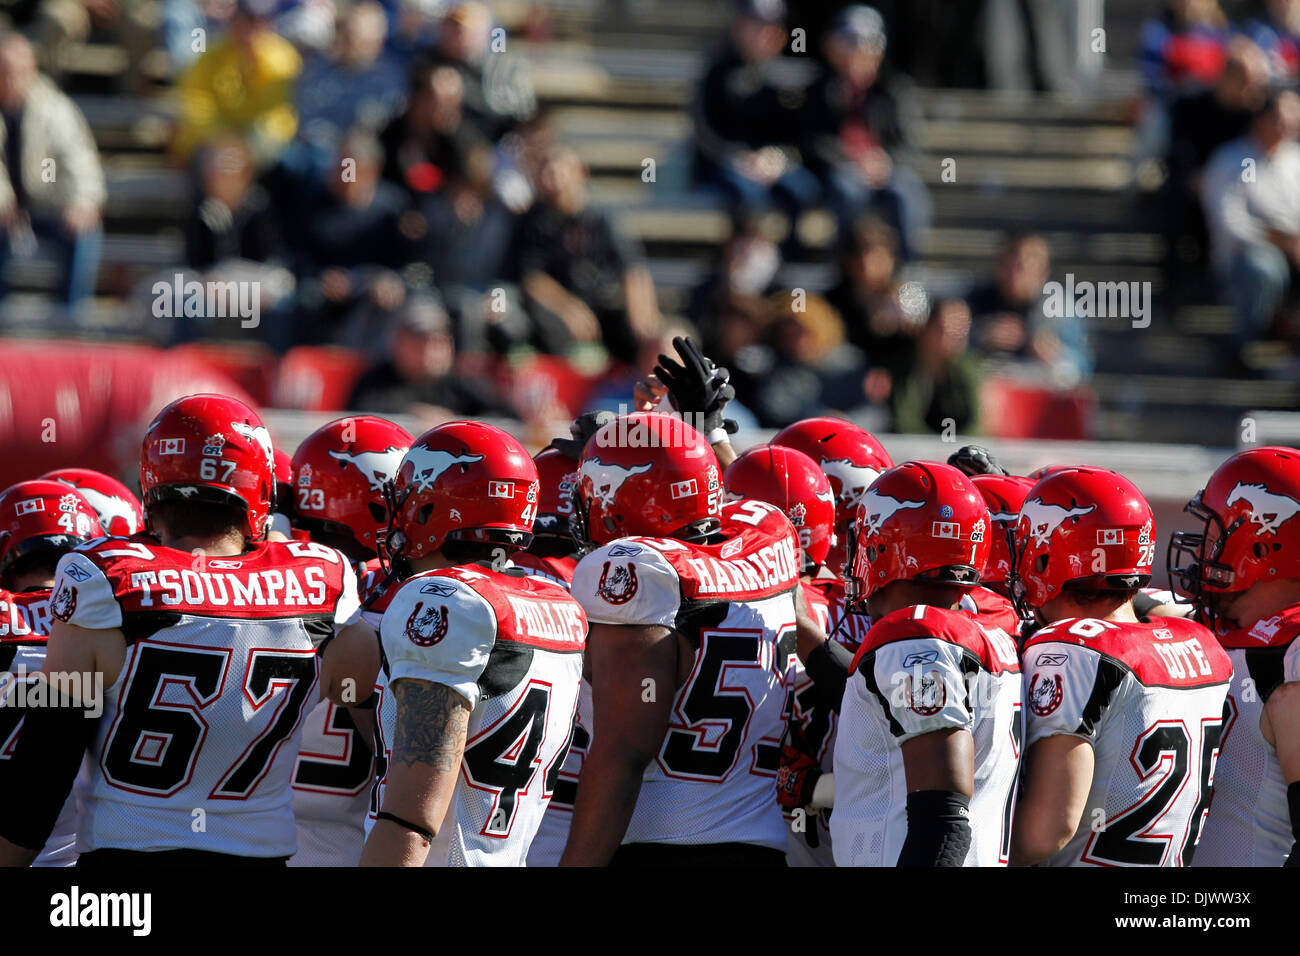 Oct. 11, 2010 - Montreal, Quebec, Canada - Calgary Stampeders huddle prior to the CFL game between the Calgary Stampeders and the Montreal Alouettes at Percival-Molson Stadium. Montreal won 46-19. (Credit Image: © Phillippe Champoux/Southcreek Global/ZUMApress.com) Stock Photo